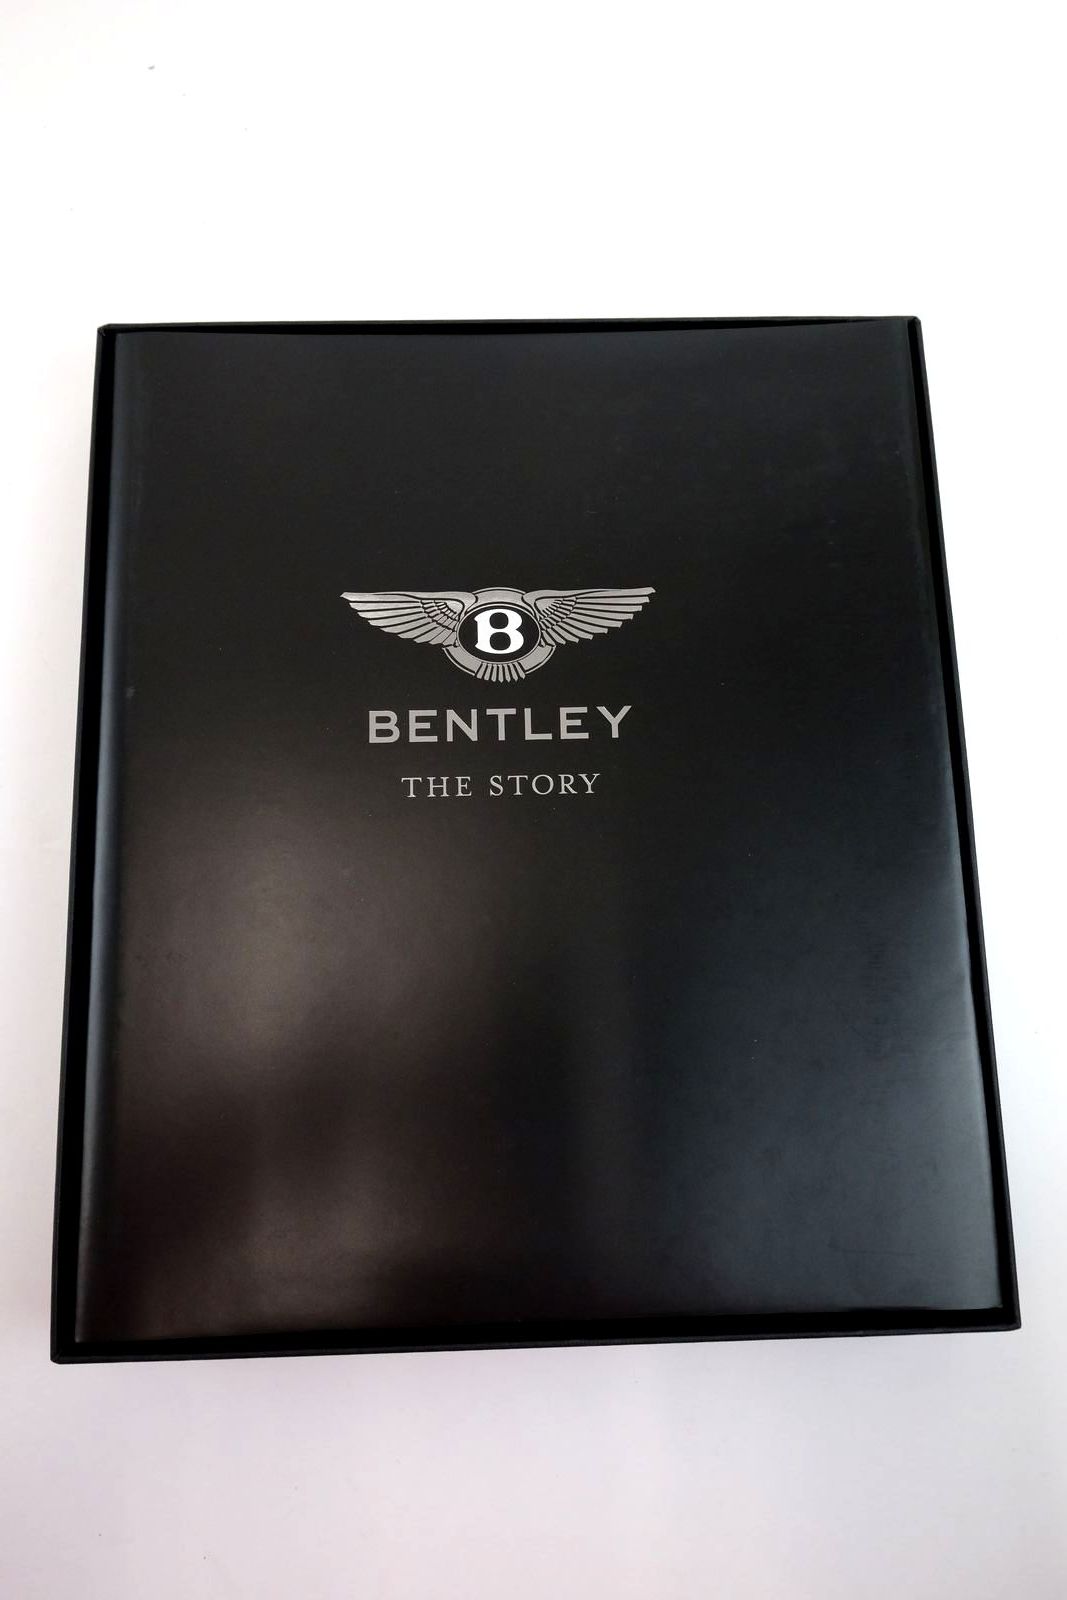 Photo of BENTLEY THE STORY written by Frankel, Andrew published by Redwood Publishing (STOCK CODE: 2135769)  for sale by Stella & Rose's Books